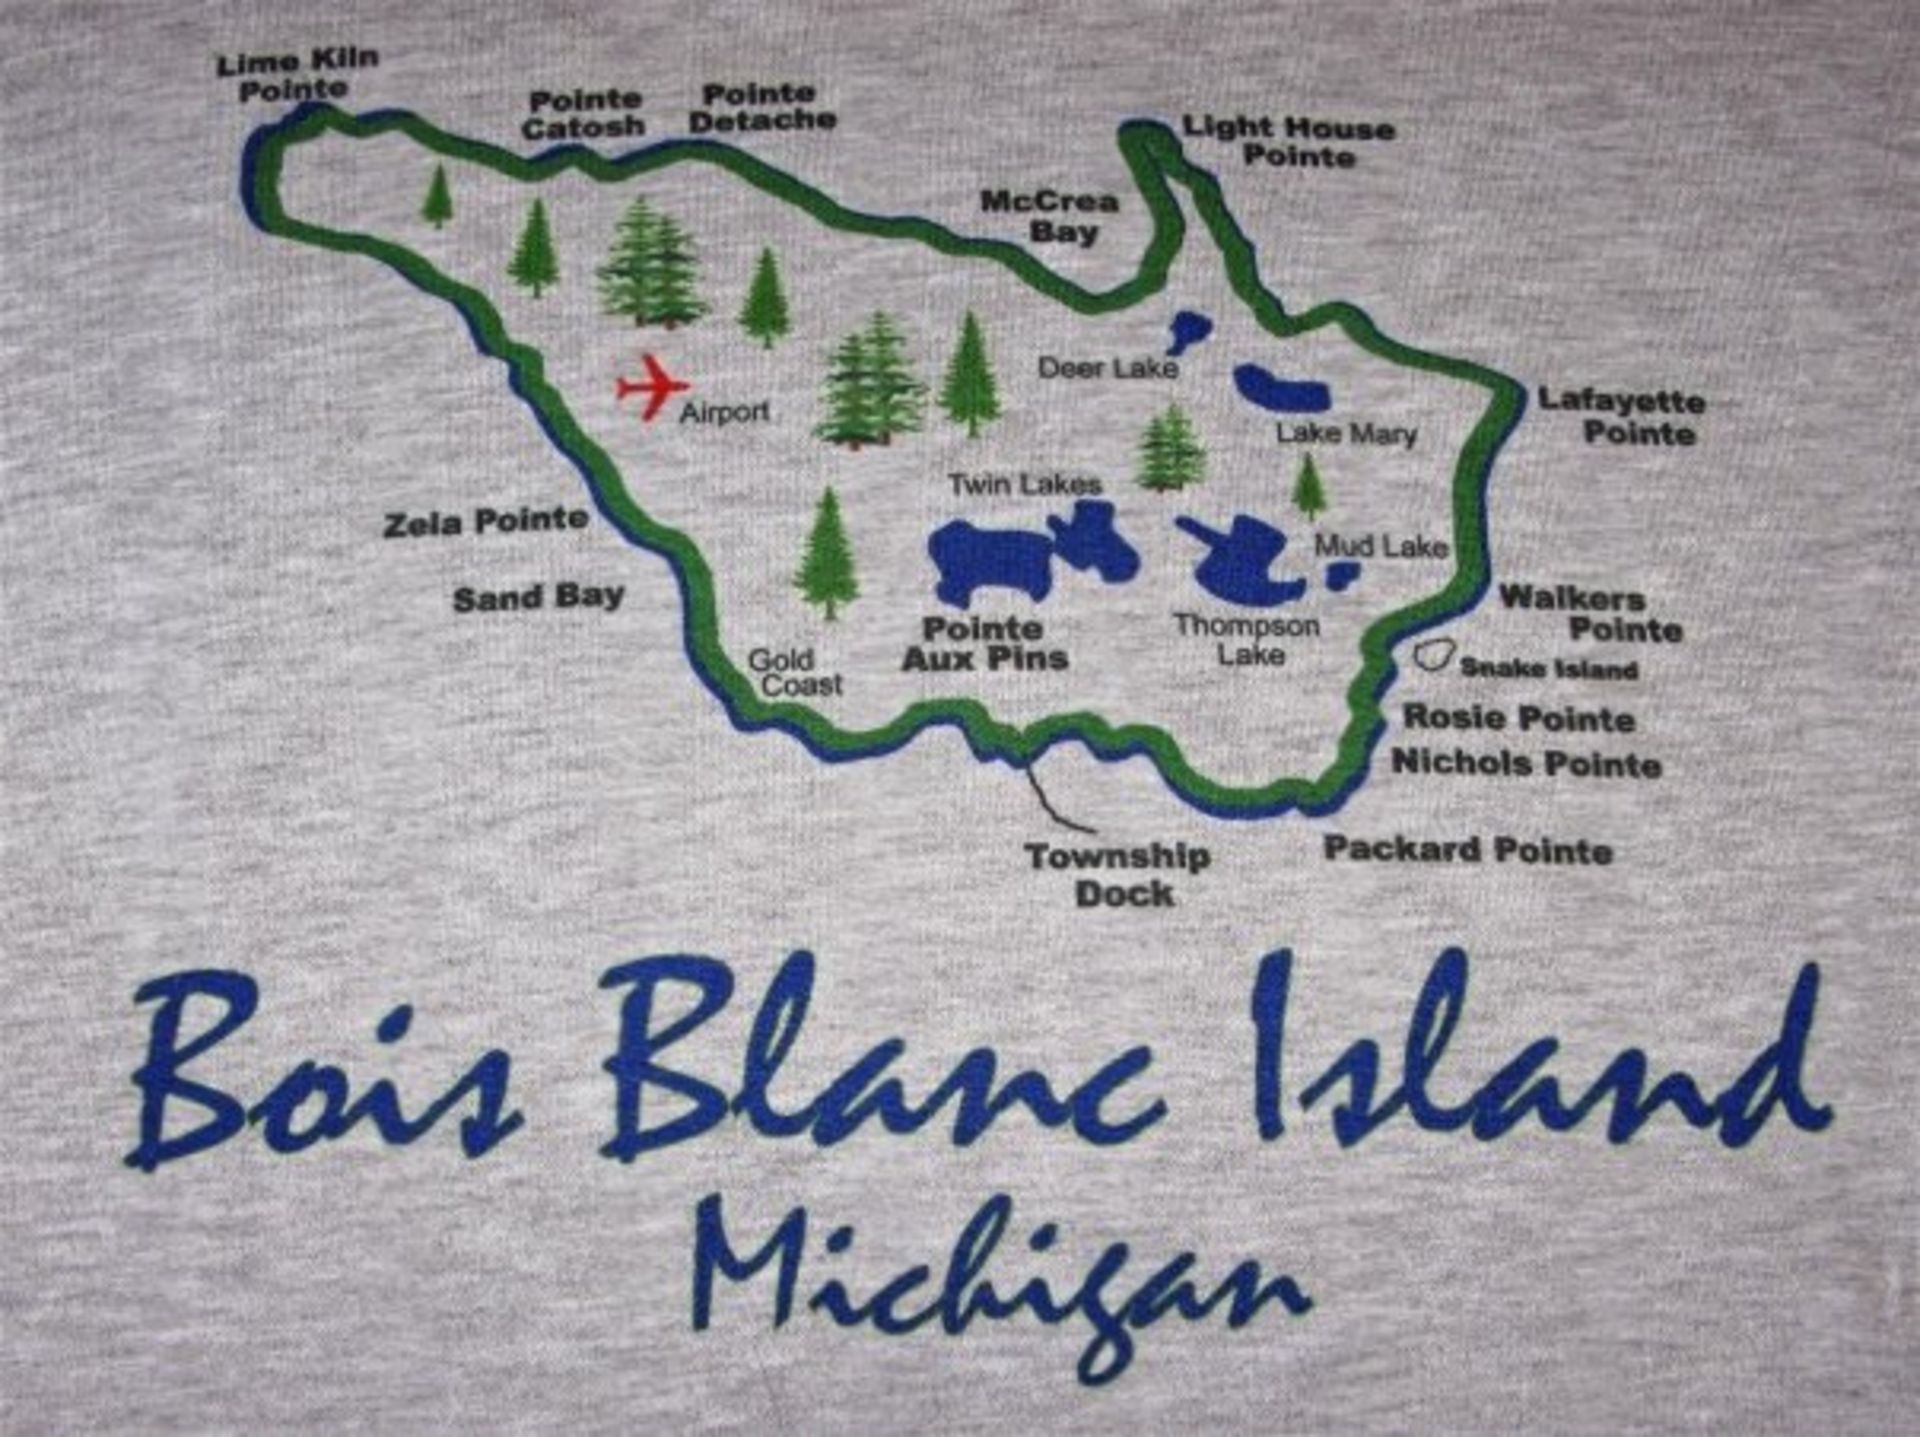 Here's Your Chance to Own Land on an Island: Bois Blanc Island, Michigan! - Image 11 of 11